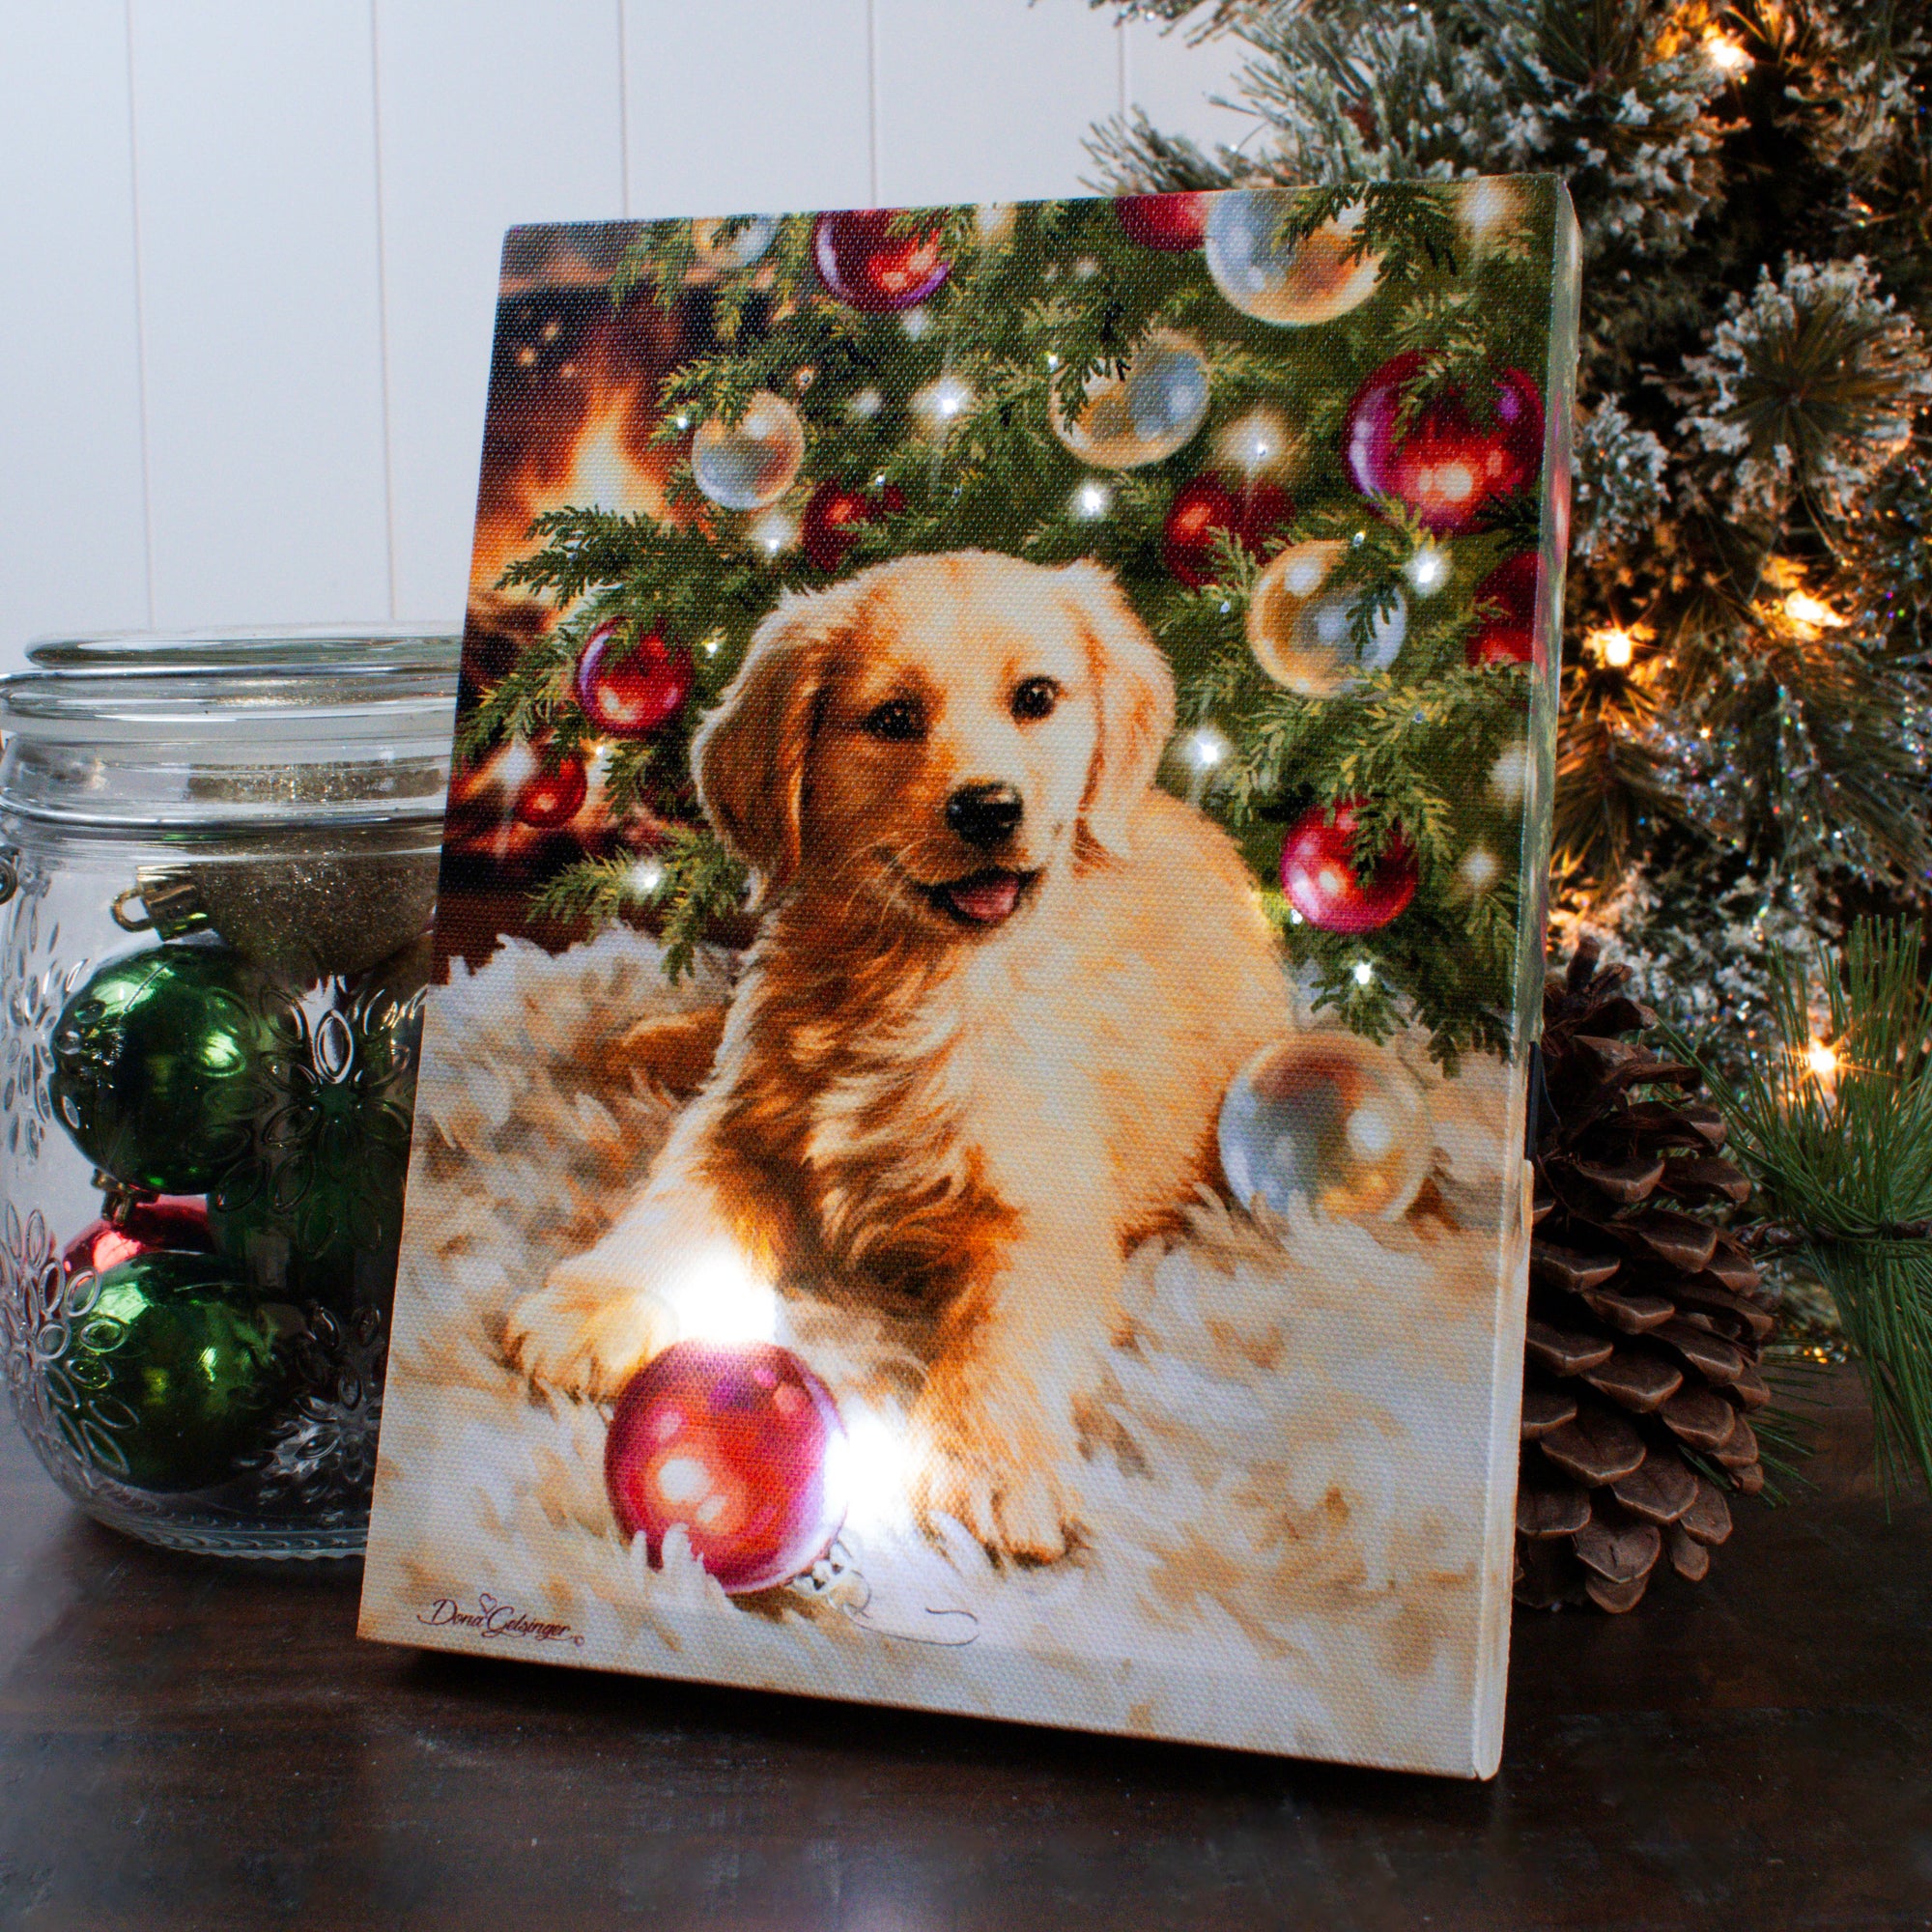 Christmas Puppy 8x6 Lighted Tabletop Canvas